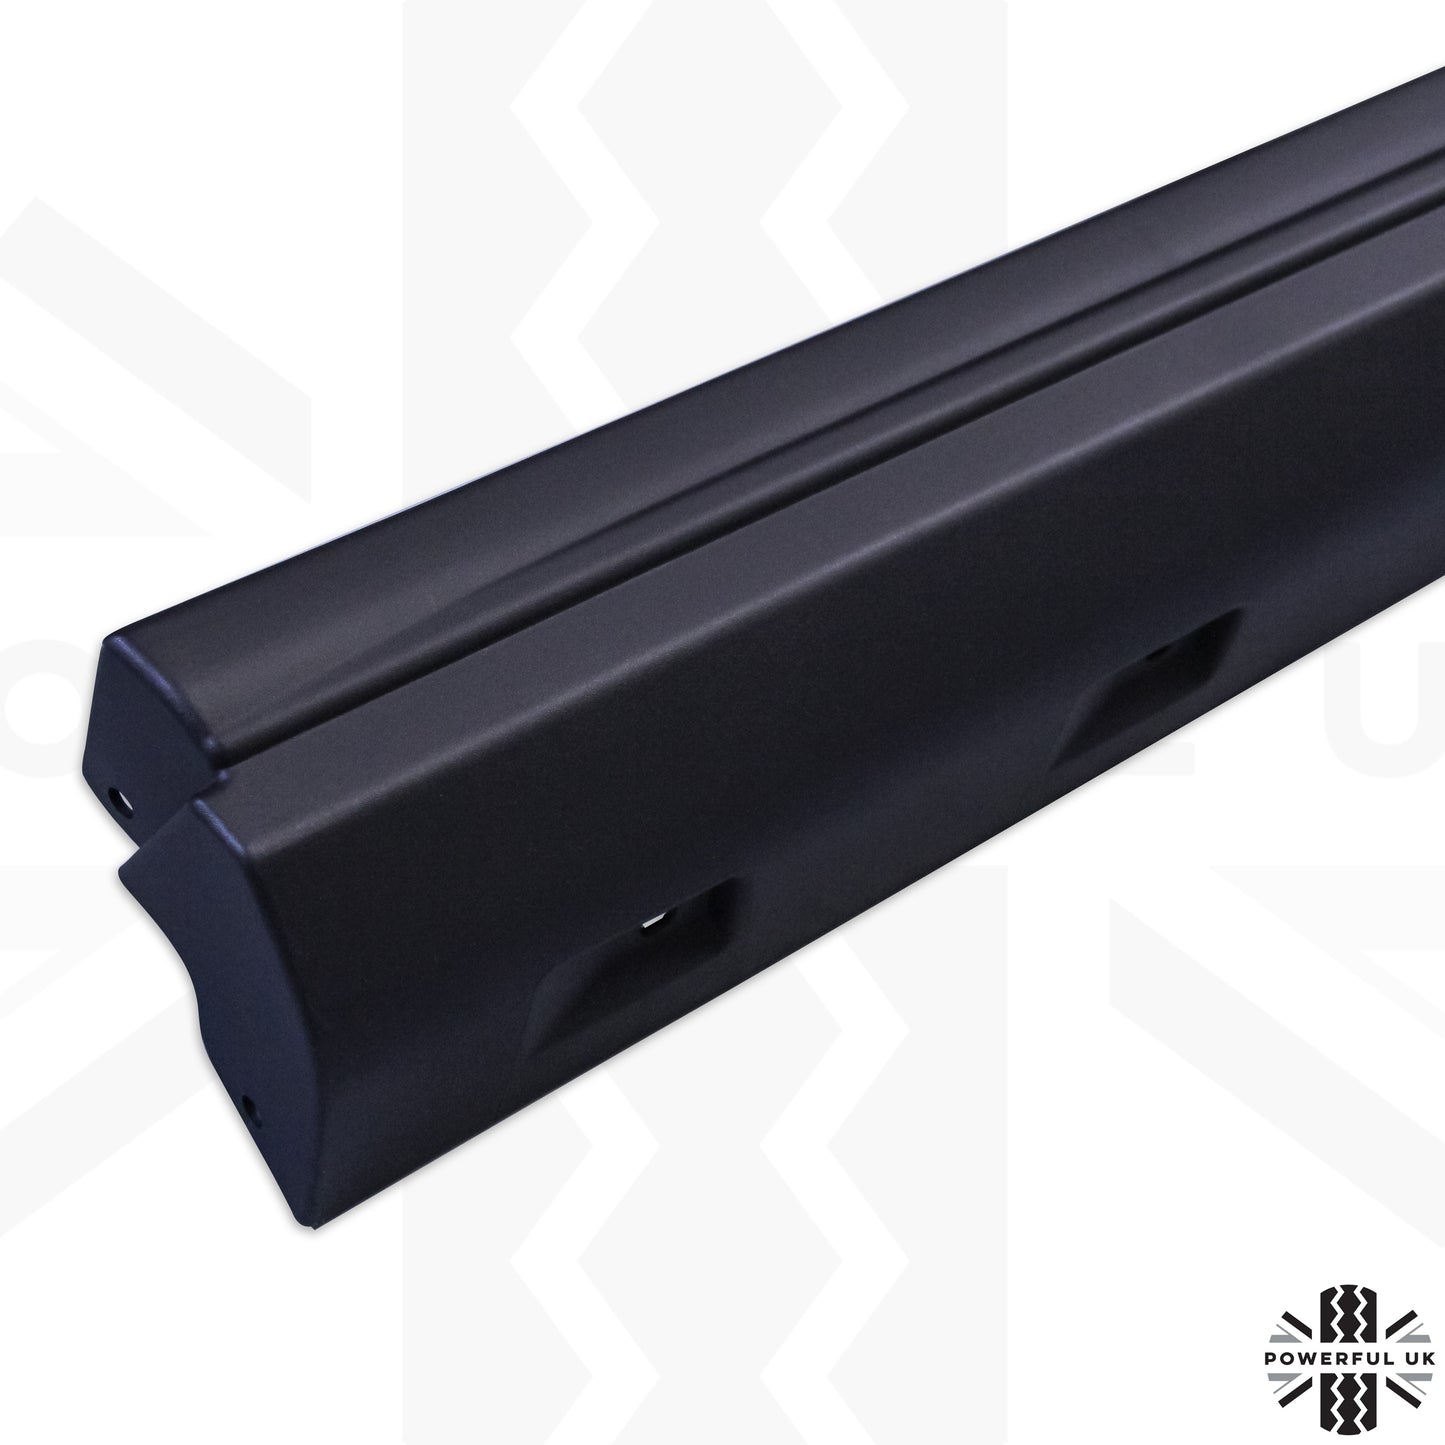 Sill Cover Plastic Moulding for Land Rover Discovery 3 & 4 - RH